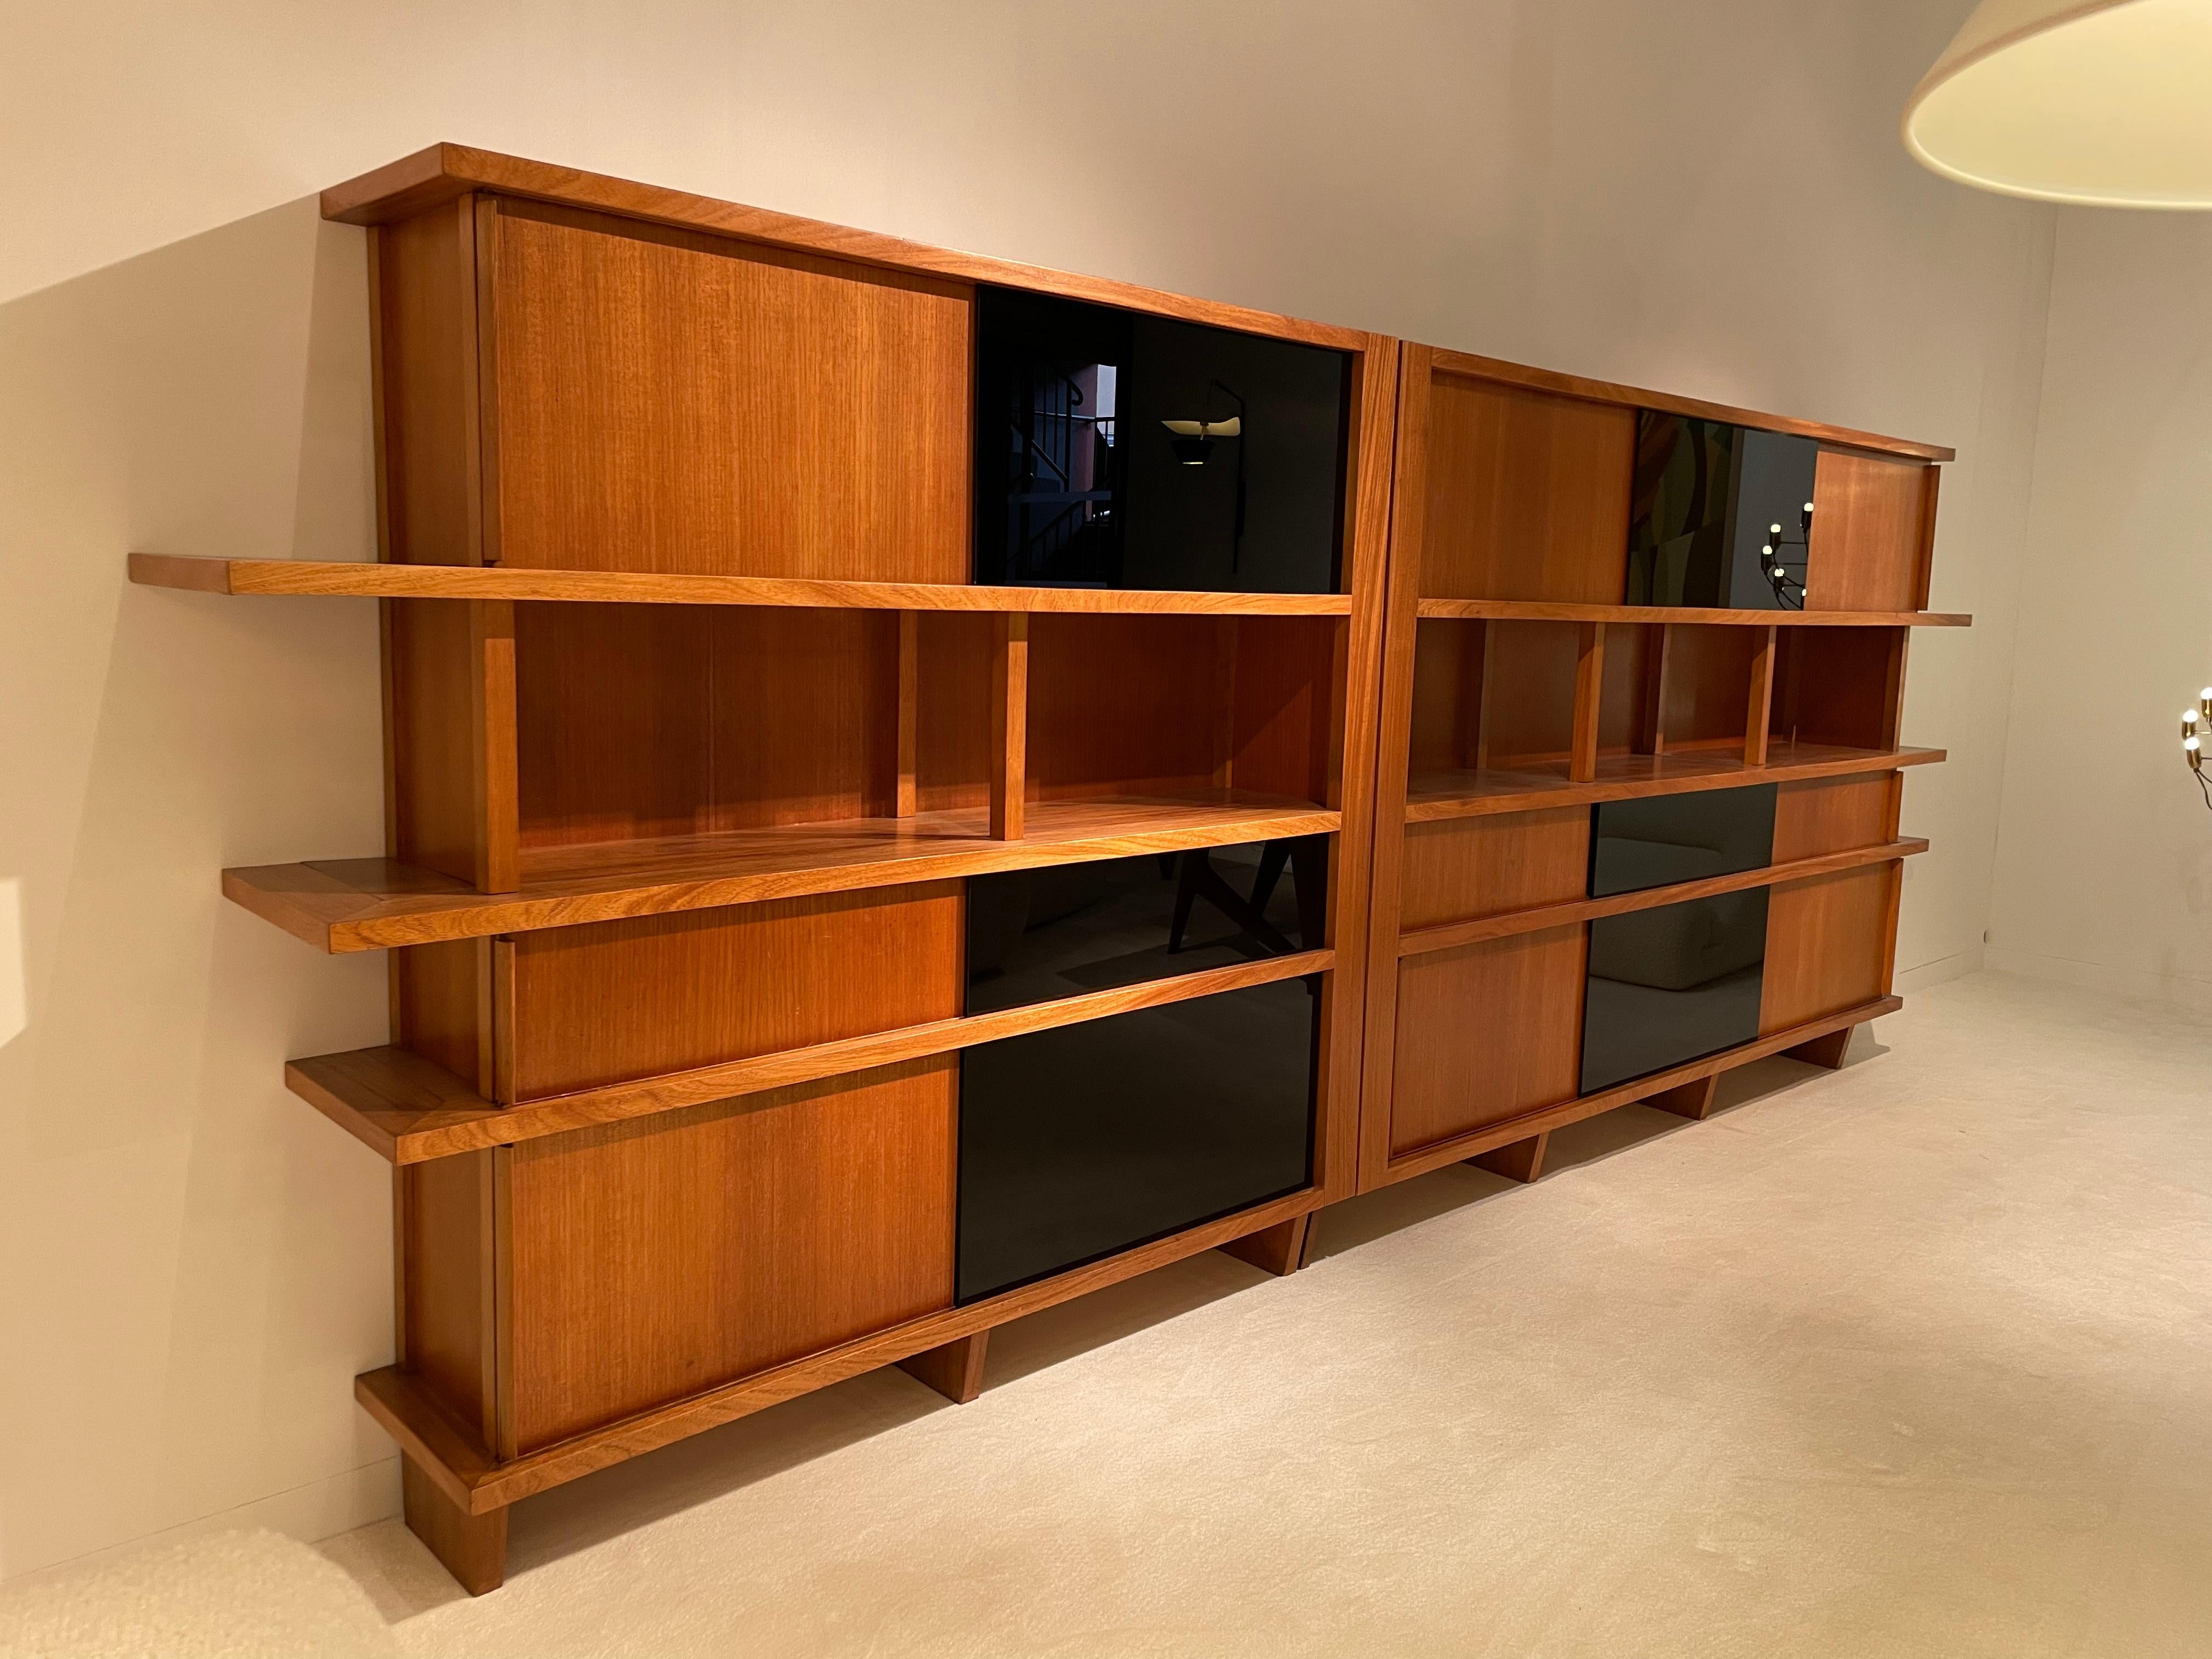 Library in walnut and opaline glass
From 1950 

Really very close to the work of Charlotte Perriand and Jacques Dumont.

 